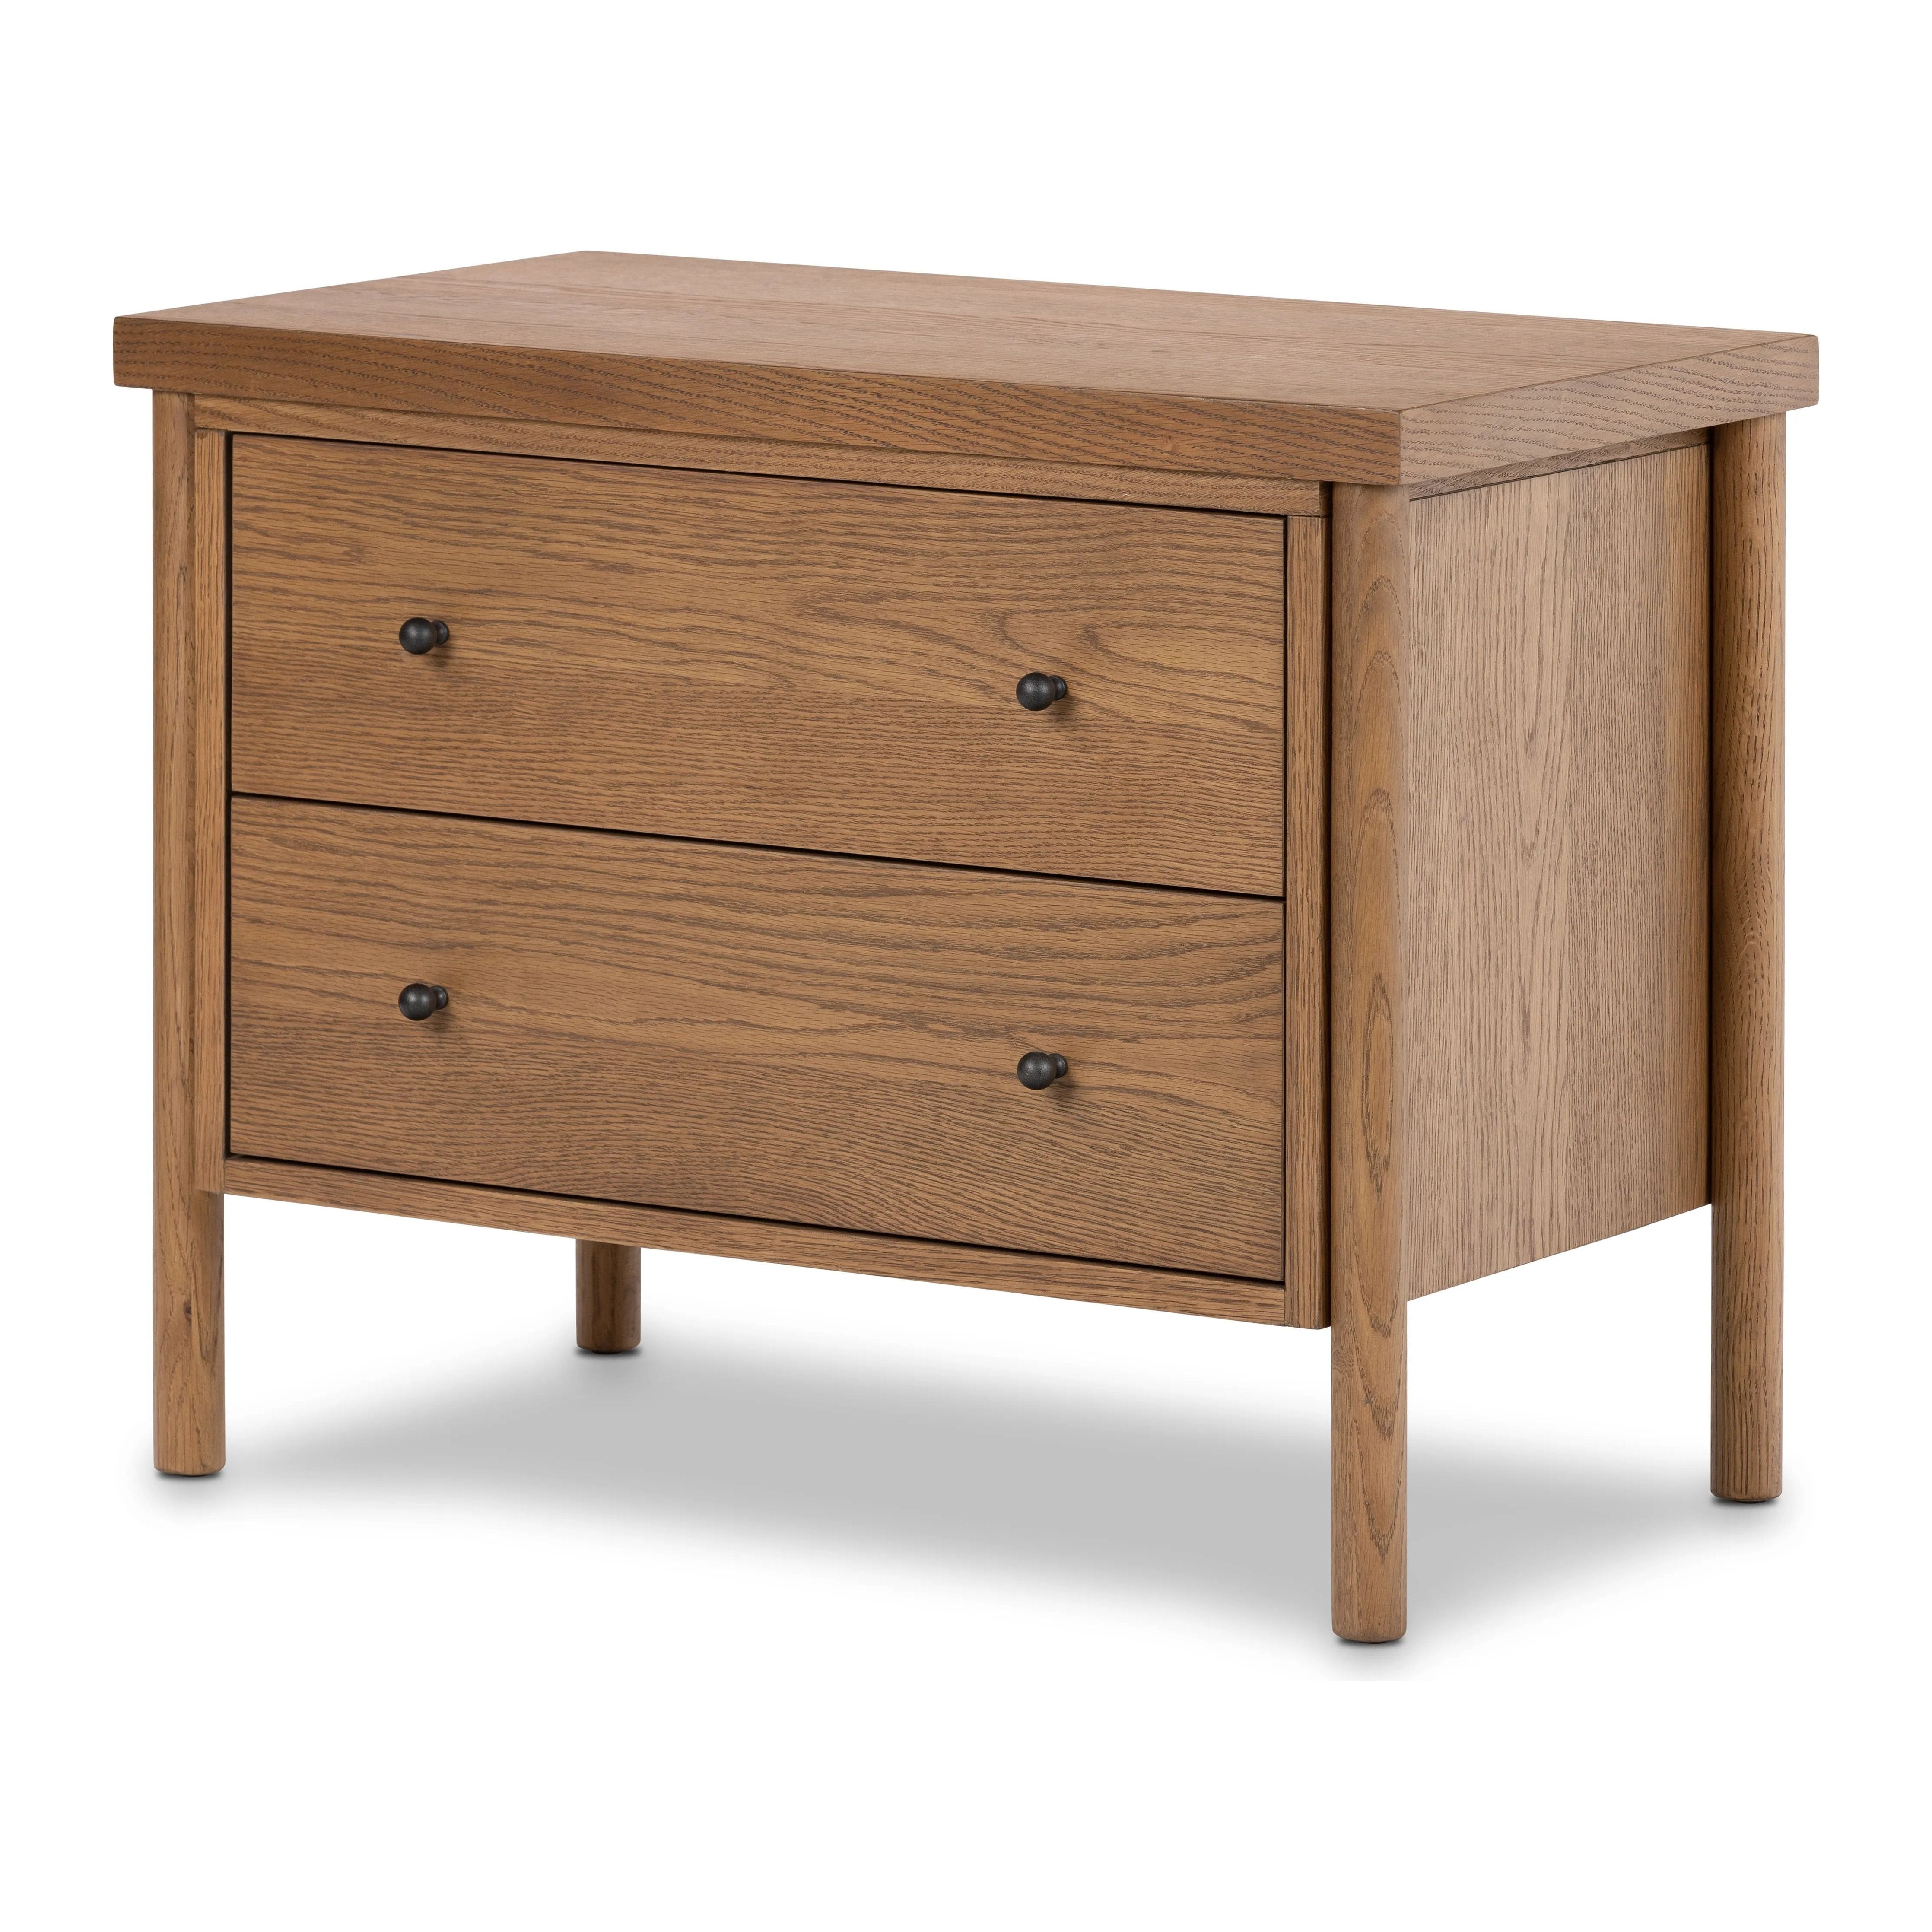 Rounded, chunky dowel legs in an amber oak finish support the overhang top of of this nightstand. Two drawers provide ample storage, finished with simple gunmetal hardware Amethyst Home provides interior design, new home construction design consulting, vintage area rugs, and lighting in the Washington metro area.